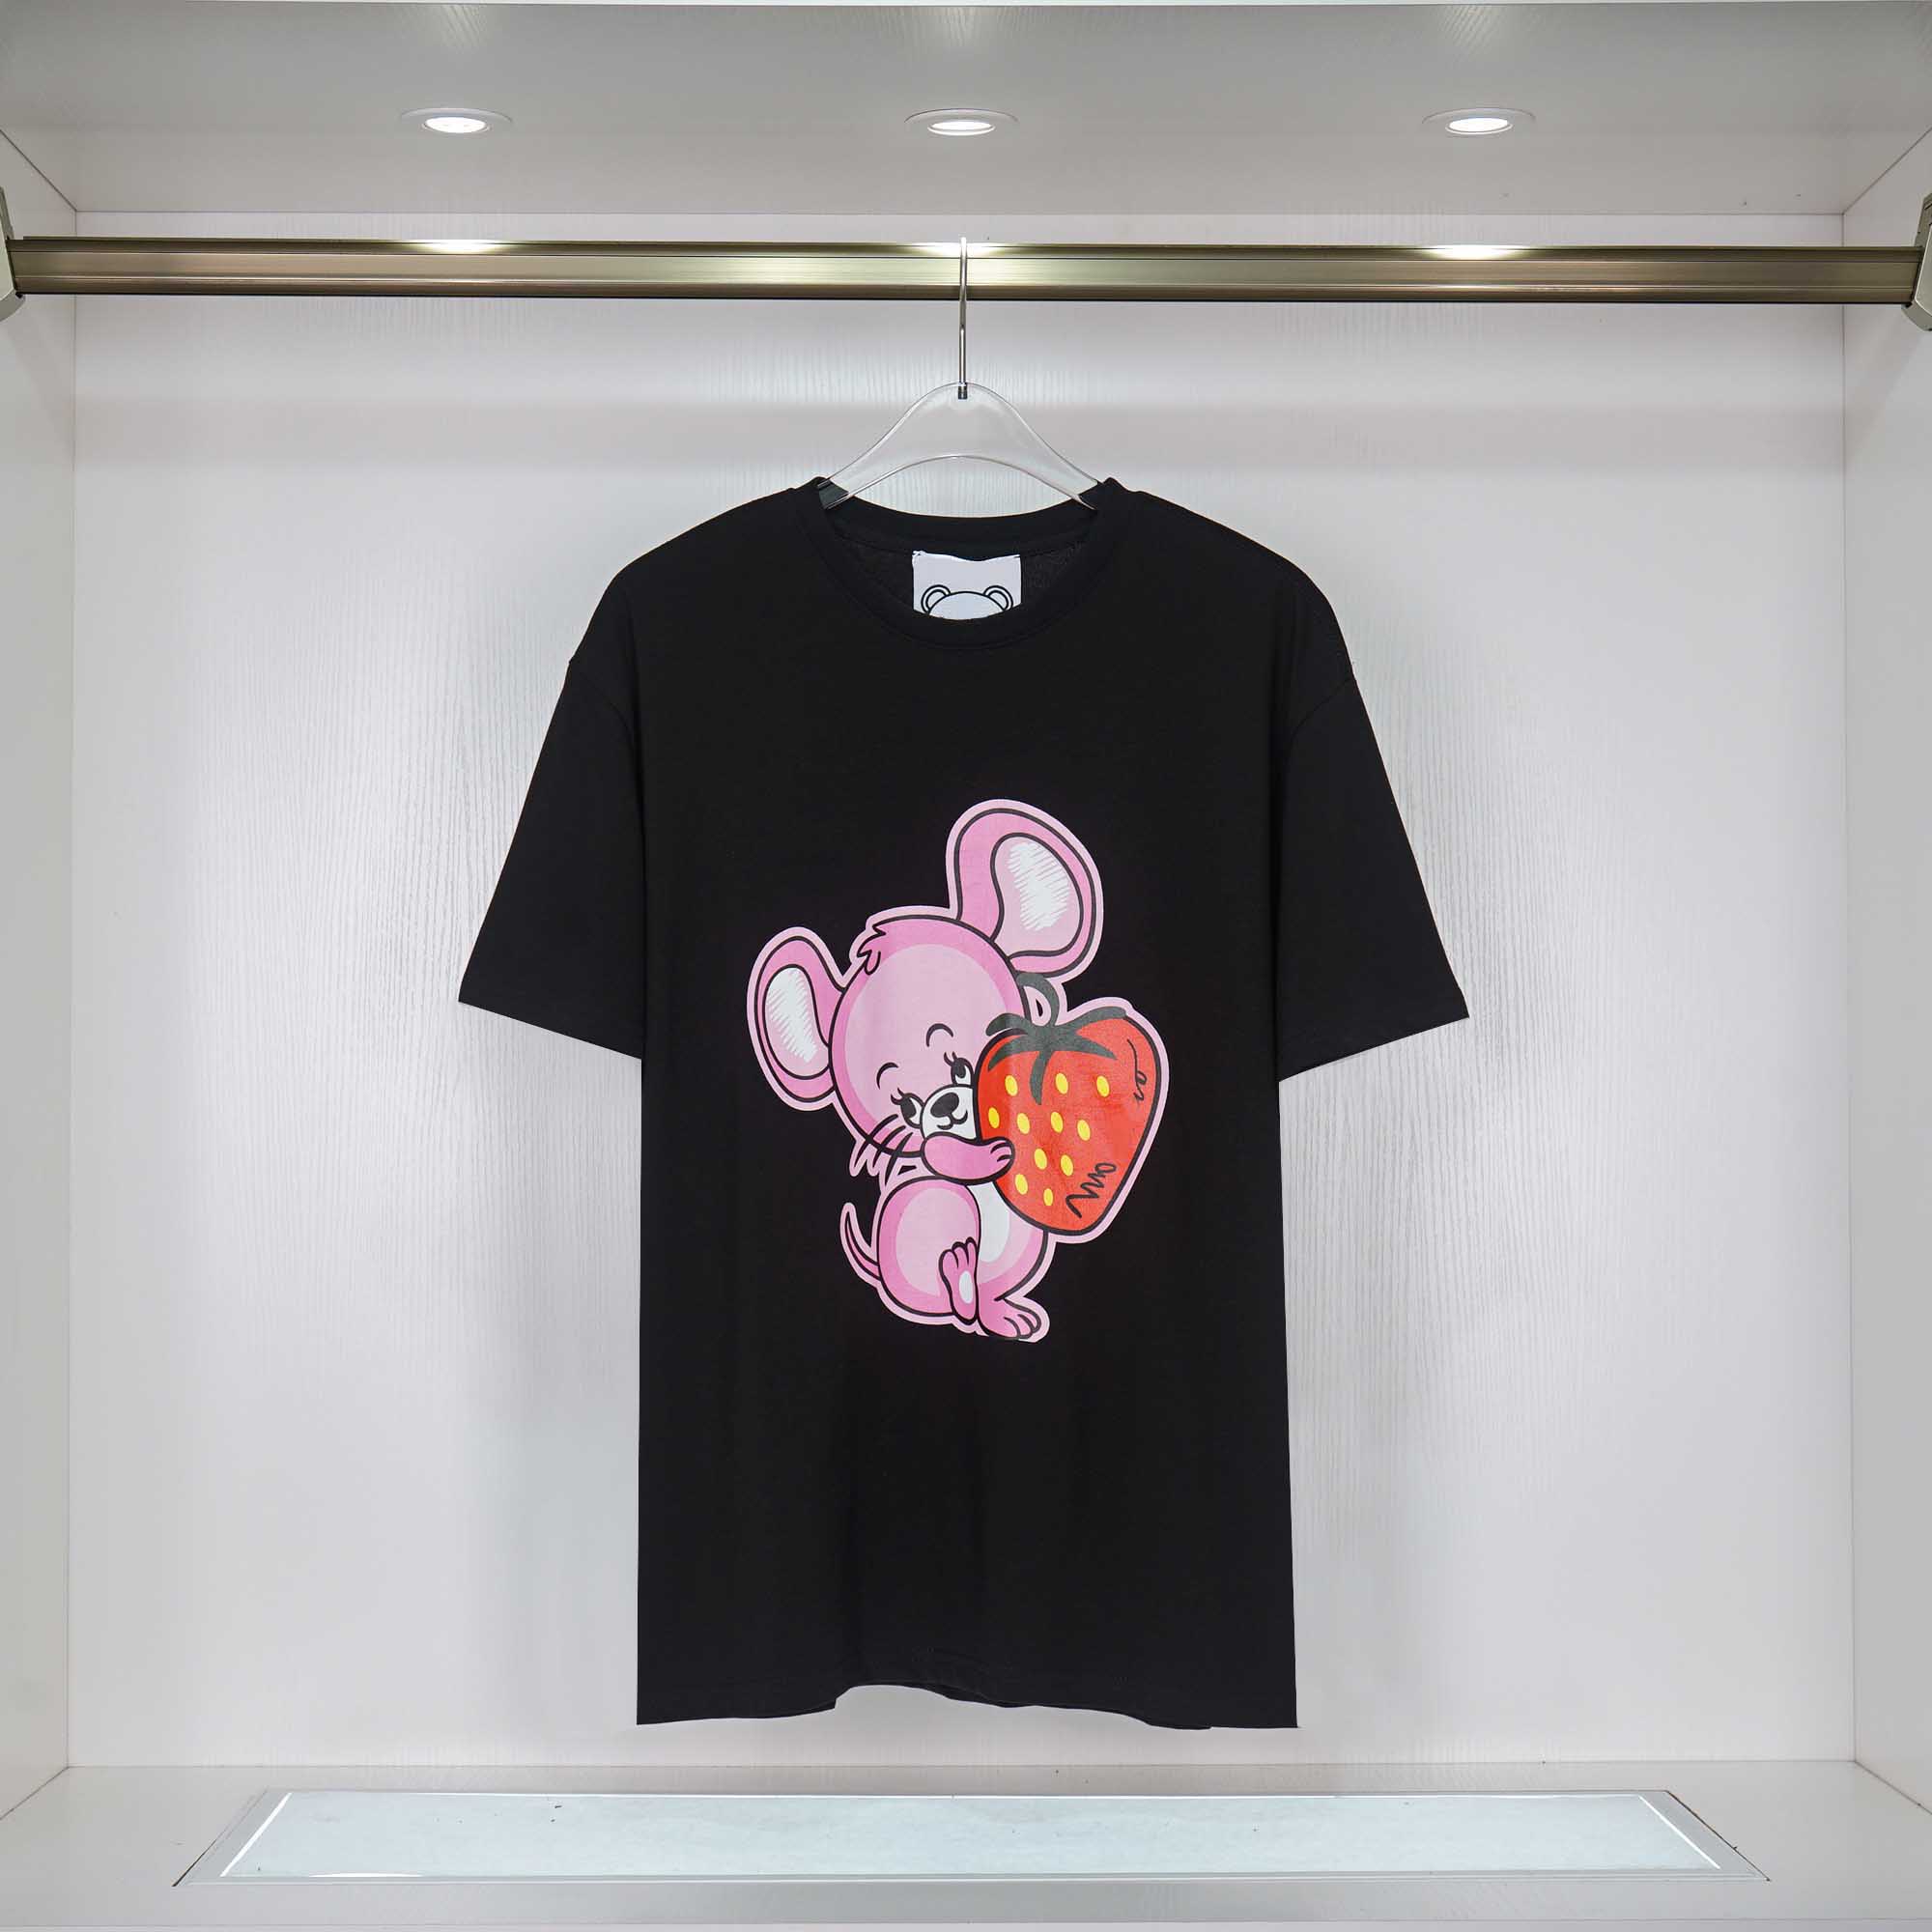 Designer Mens T-shirt Summer Tees Tops with Mouse And Strawberry Print Round Neck Fashion Short Sleeve Tee Shirt For Women Men S-2XL